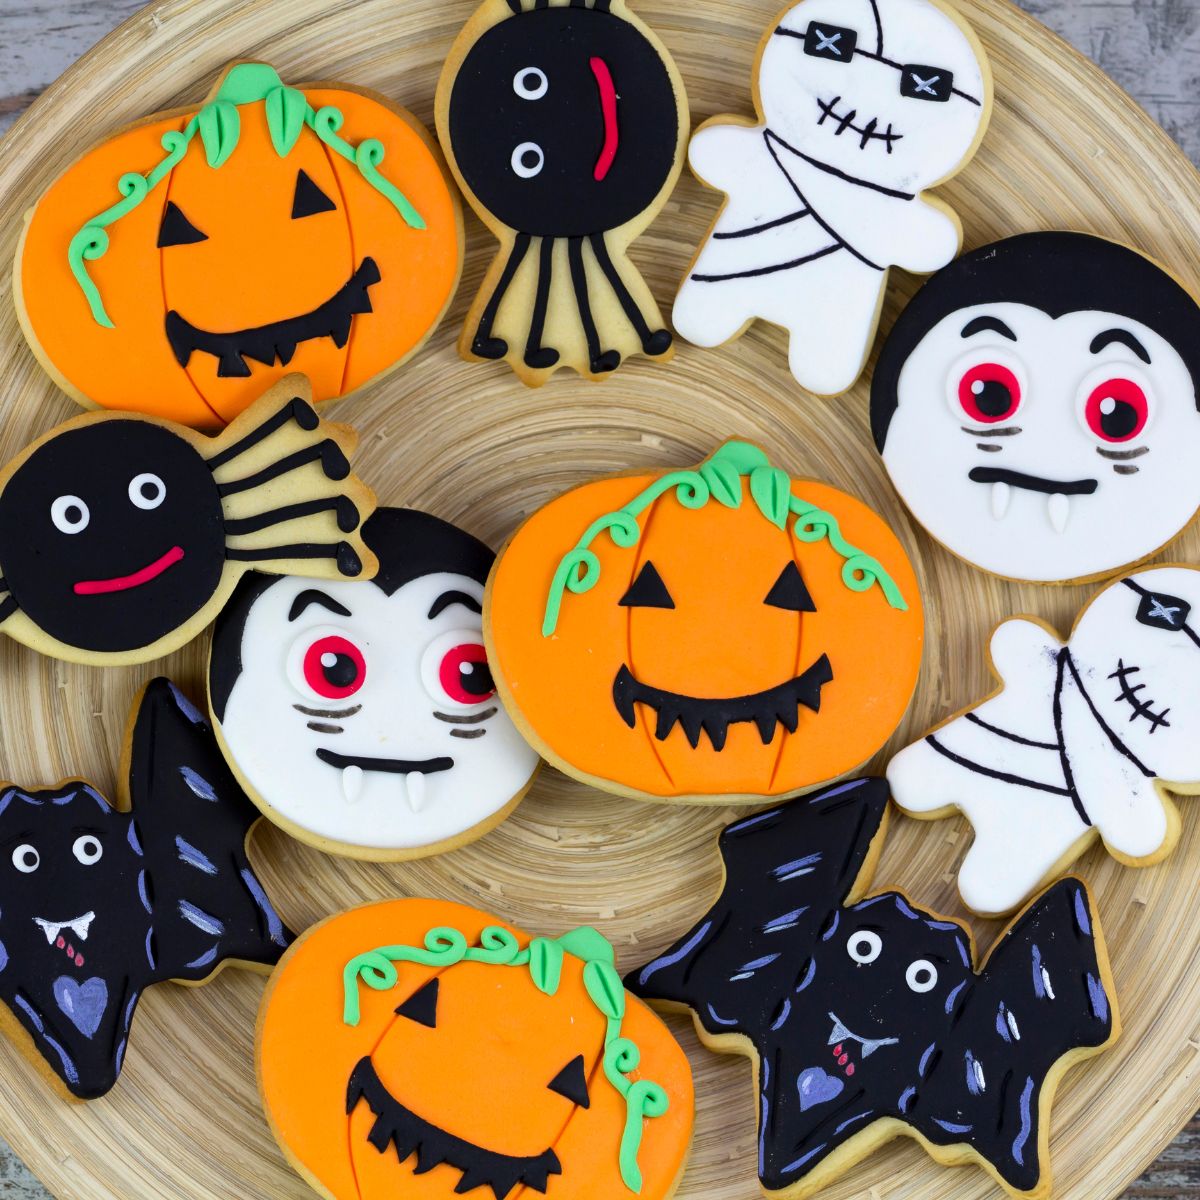 Halloween frosted cookies on a plate. Includes pumpkins, spiders, mummies and dracula.